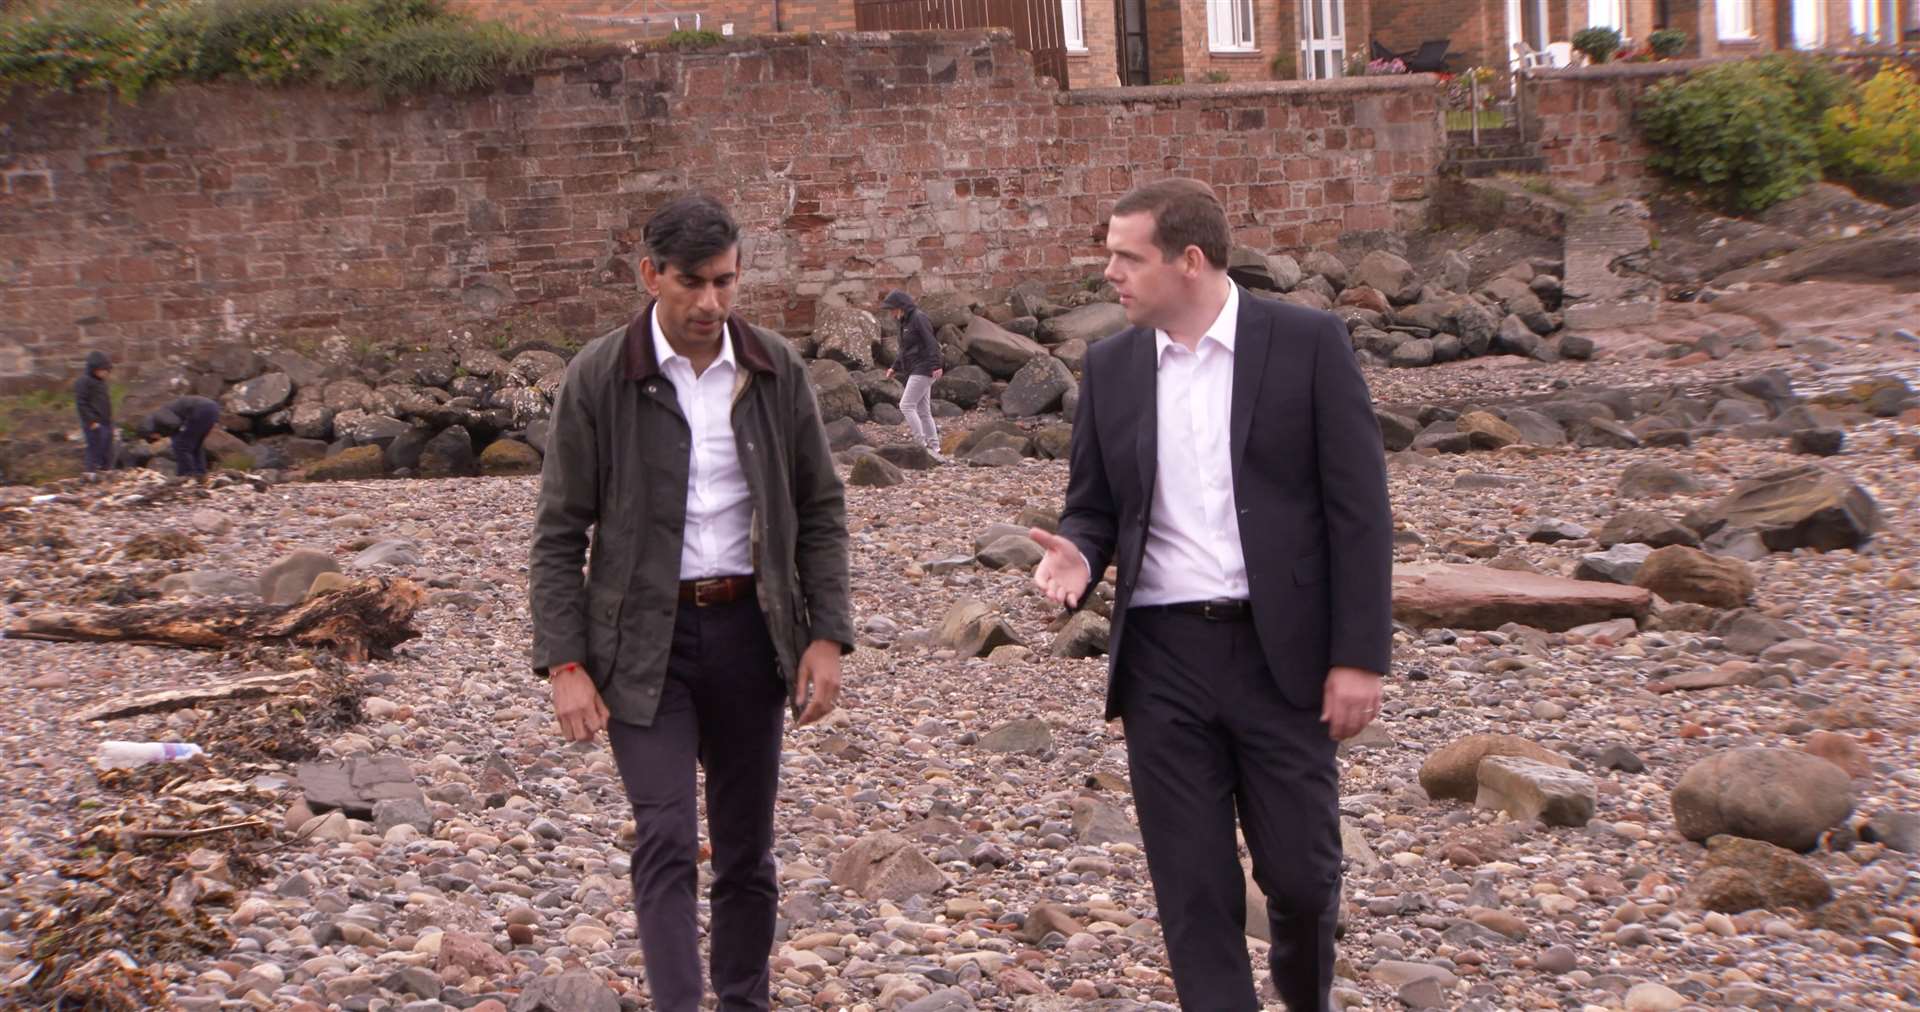 Moray MP and Scots Tory leader Douglas Ross chats to Chancellor of the Exchequer Rishni Sunak. Picture: Moray Conservatives